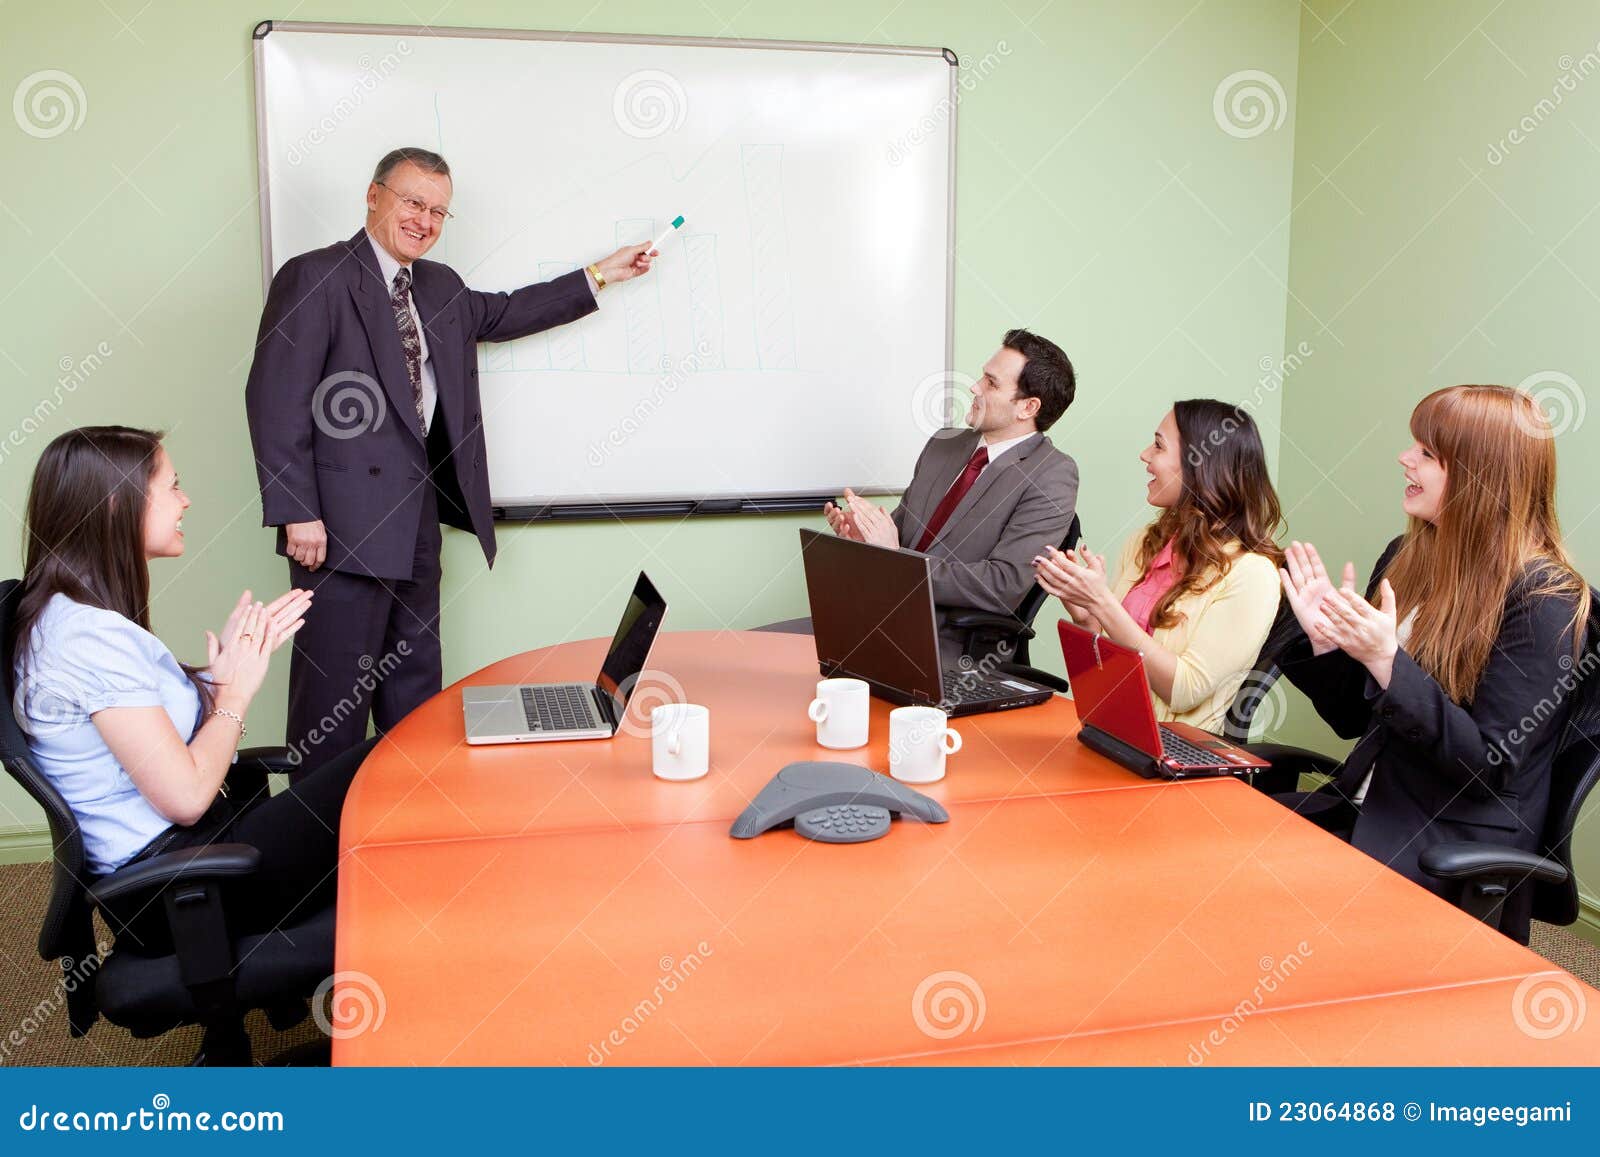 business team motivated by positive presenter